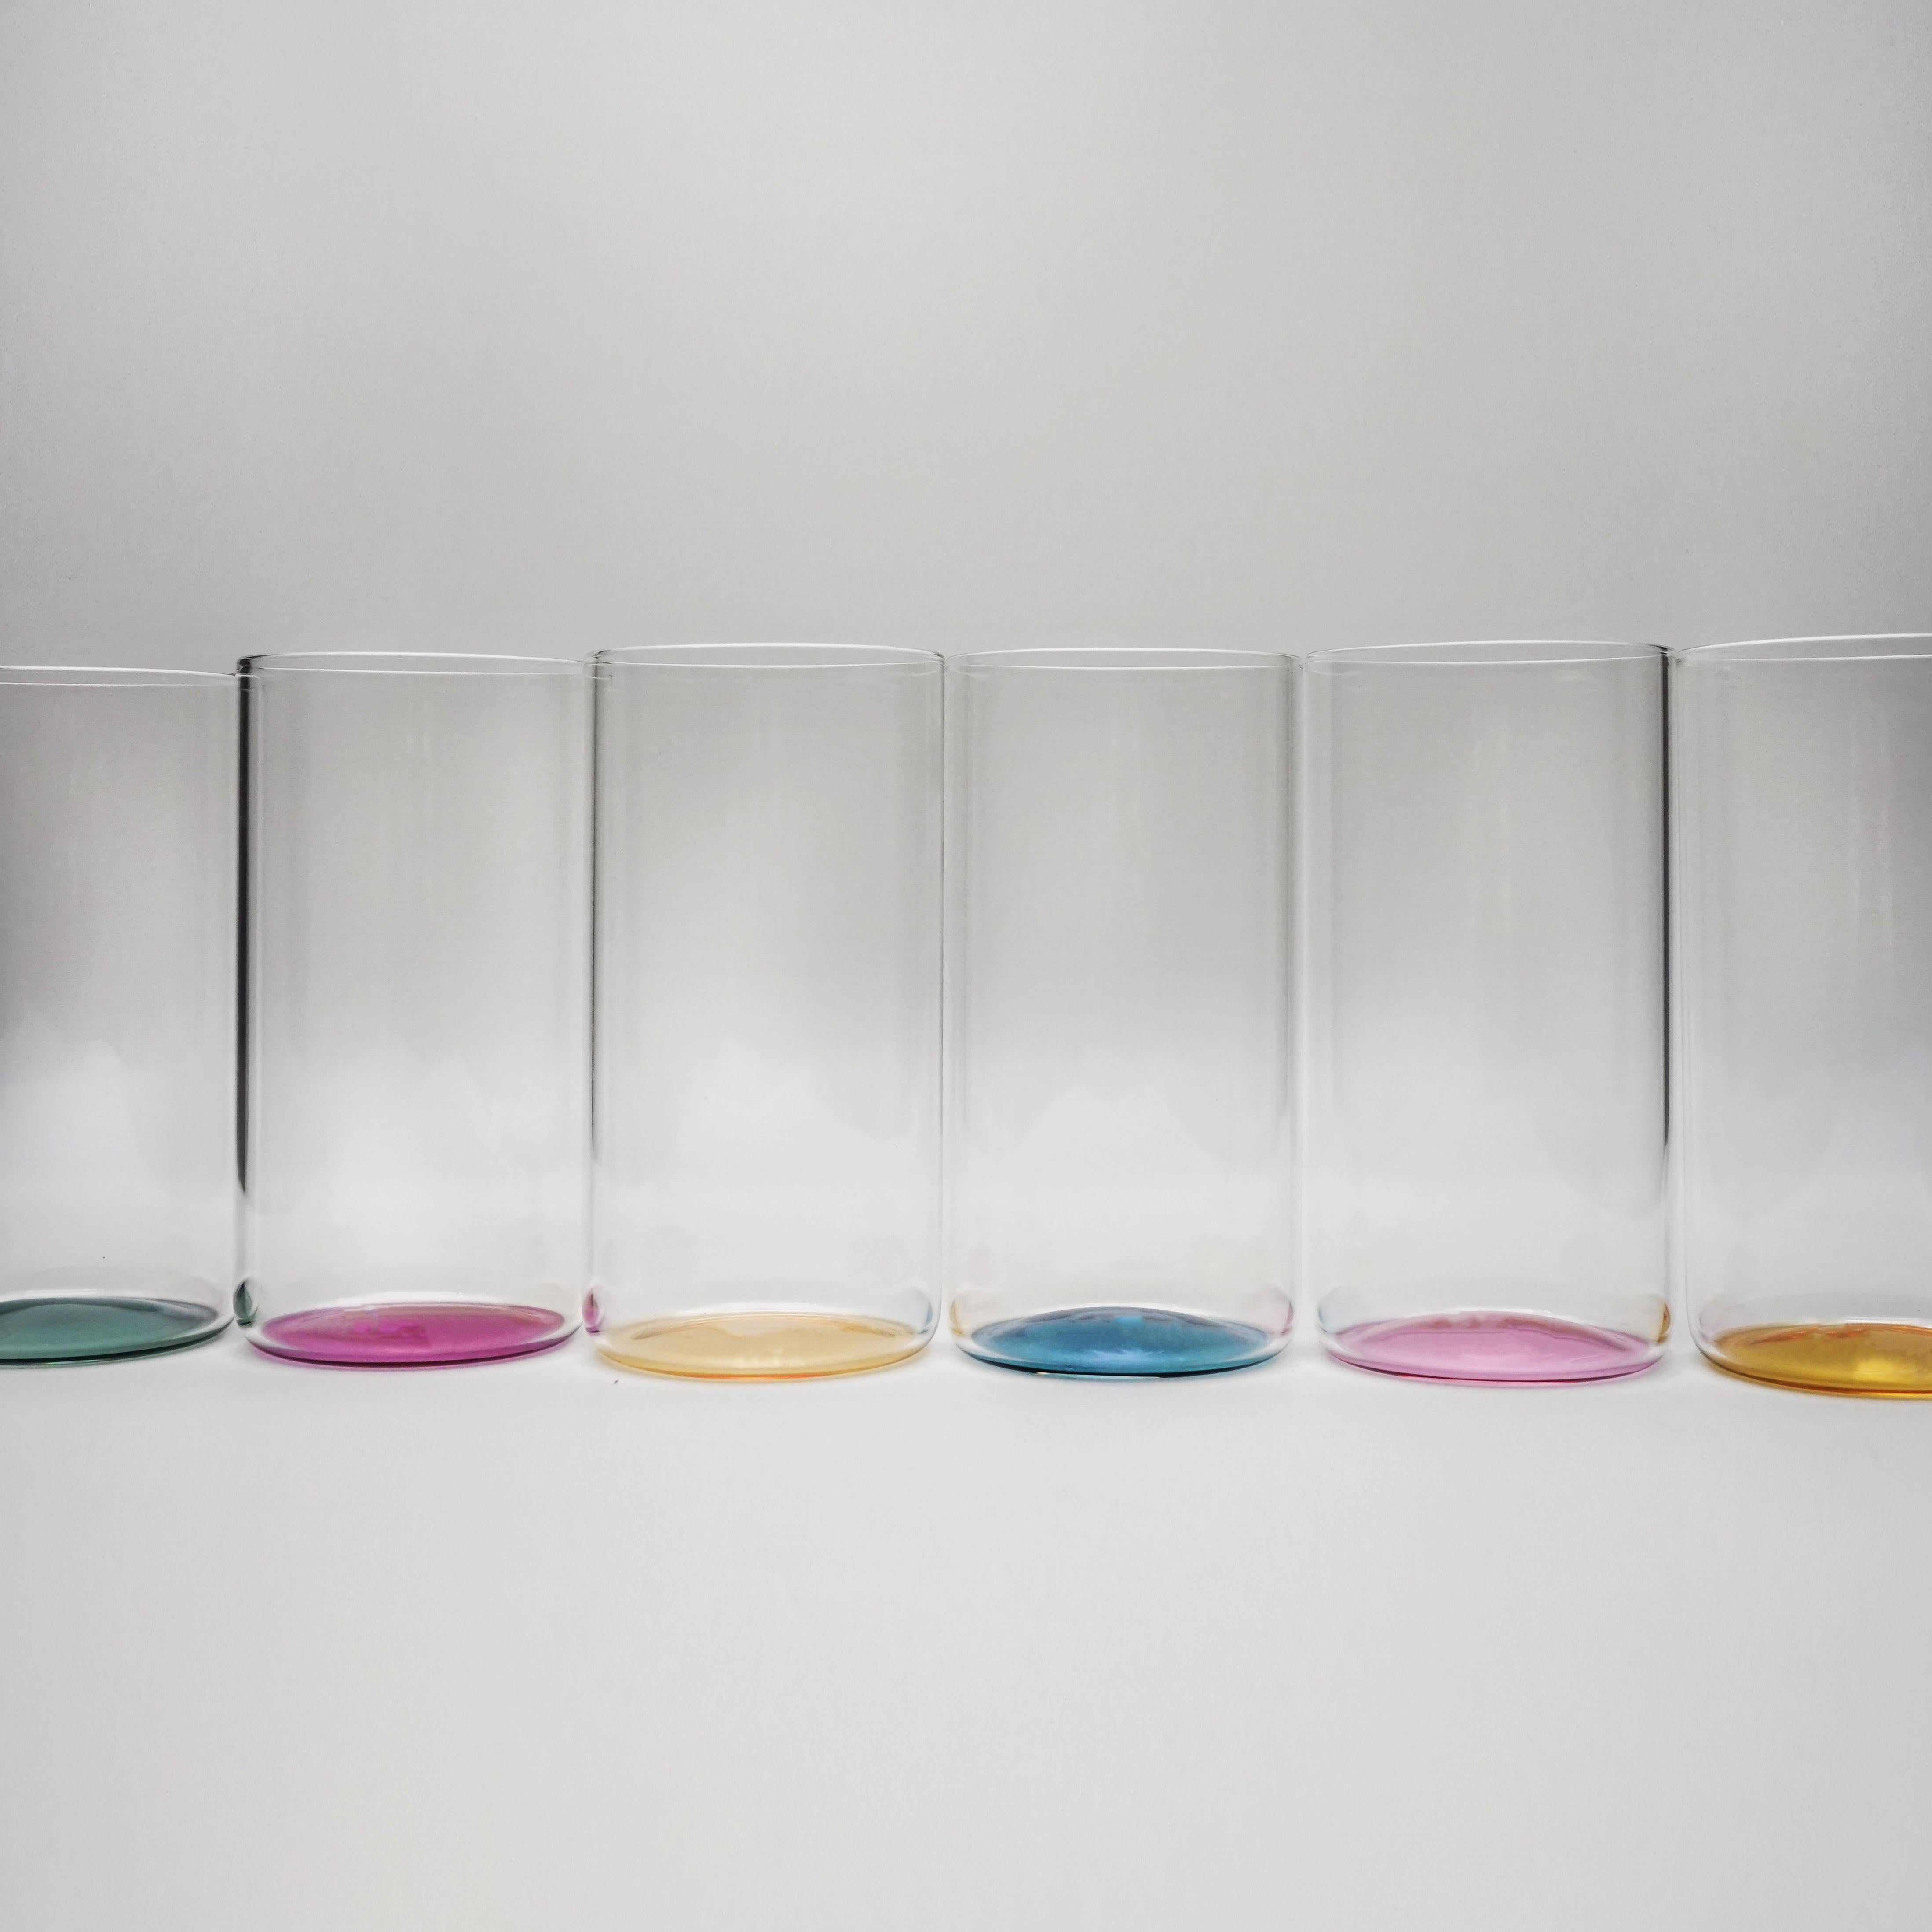 Minimalist 21st Century Set of 6 Colored Longdrink Glass Iride, Hand-Crafted, Kanz For Sale